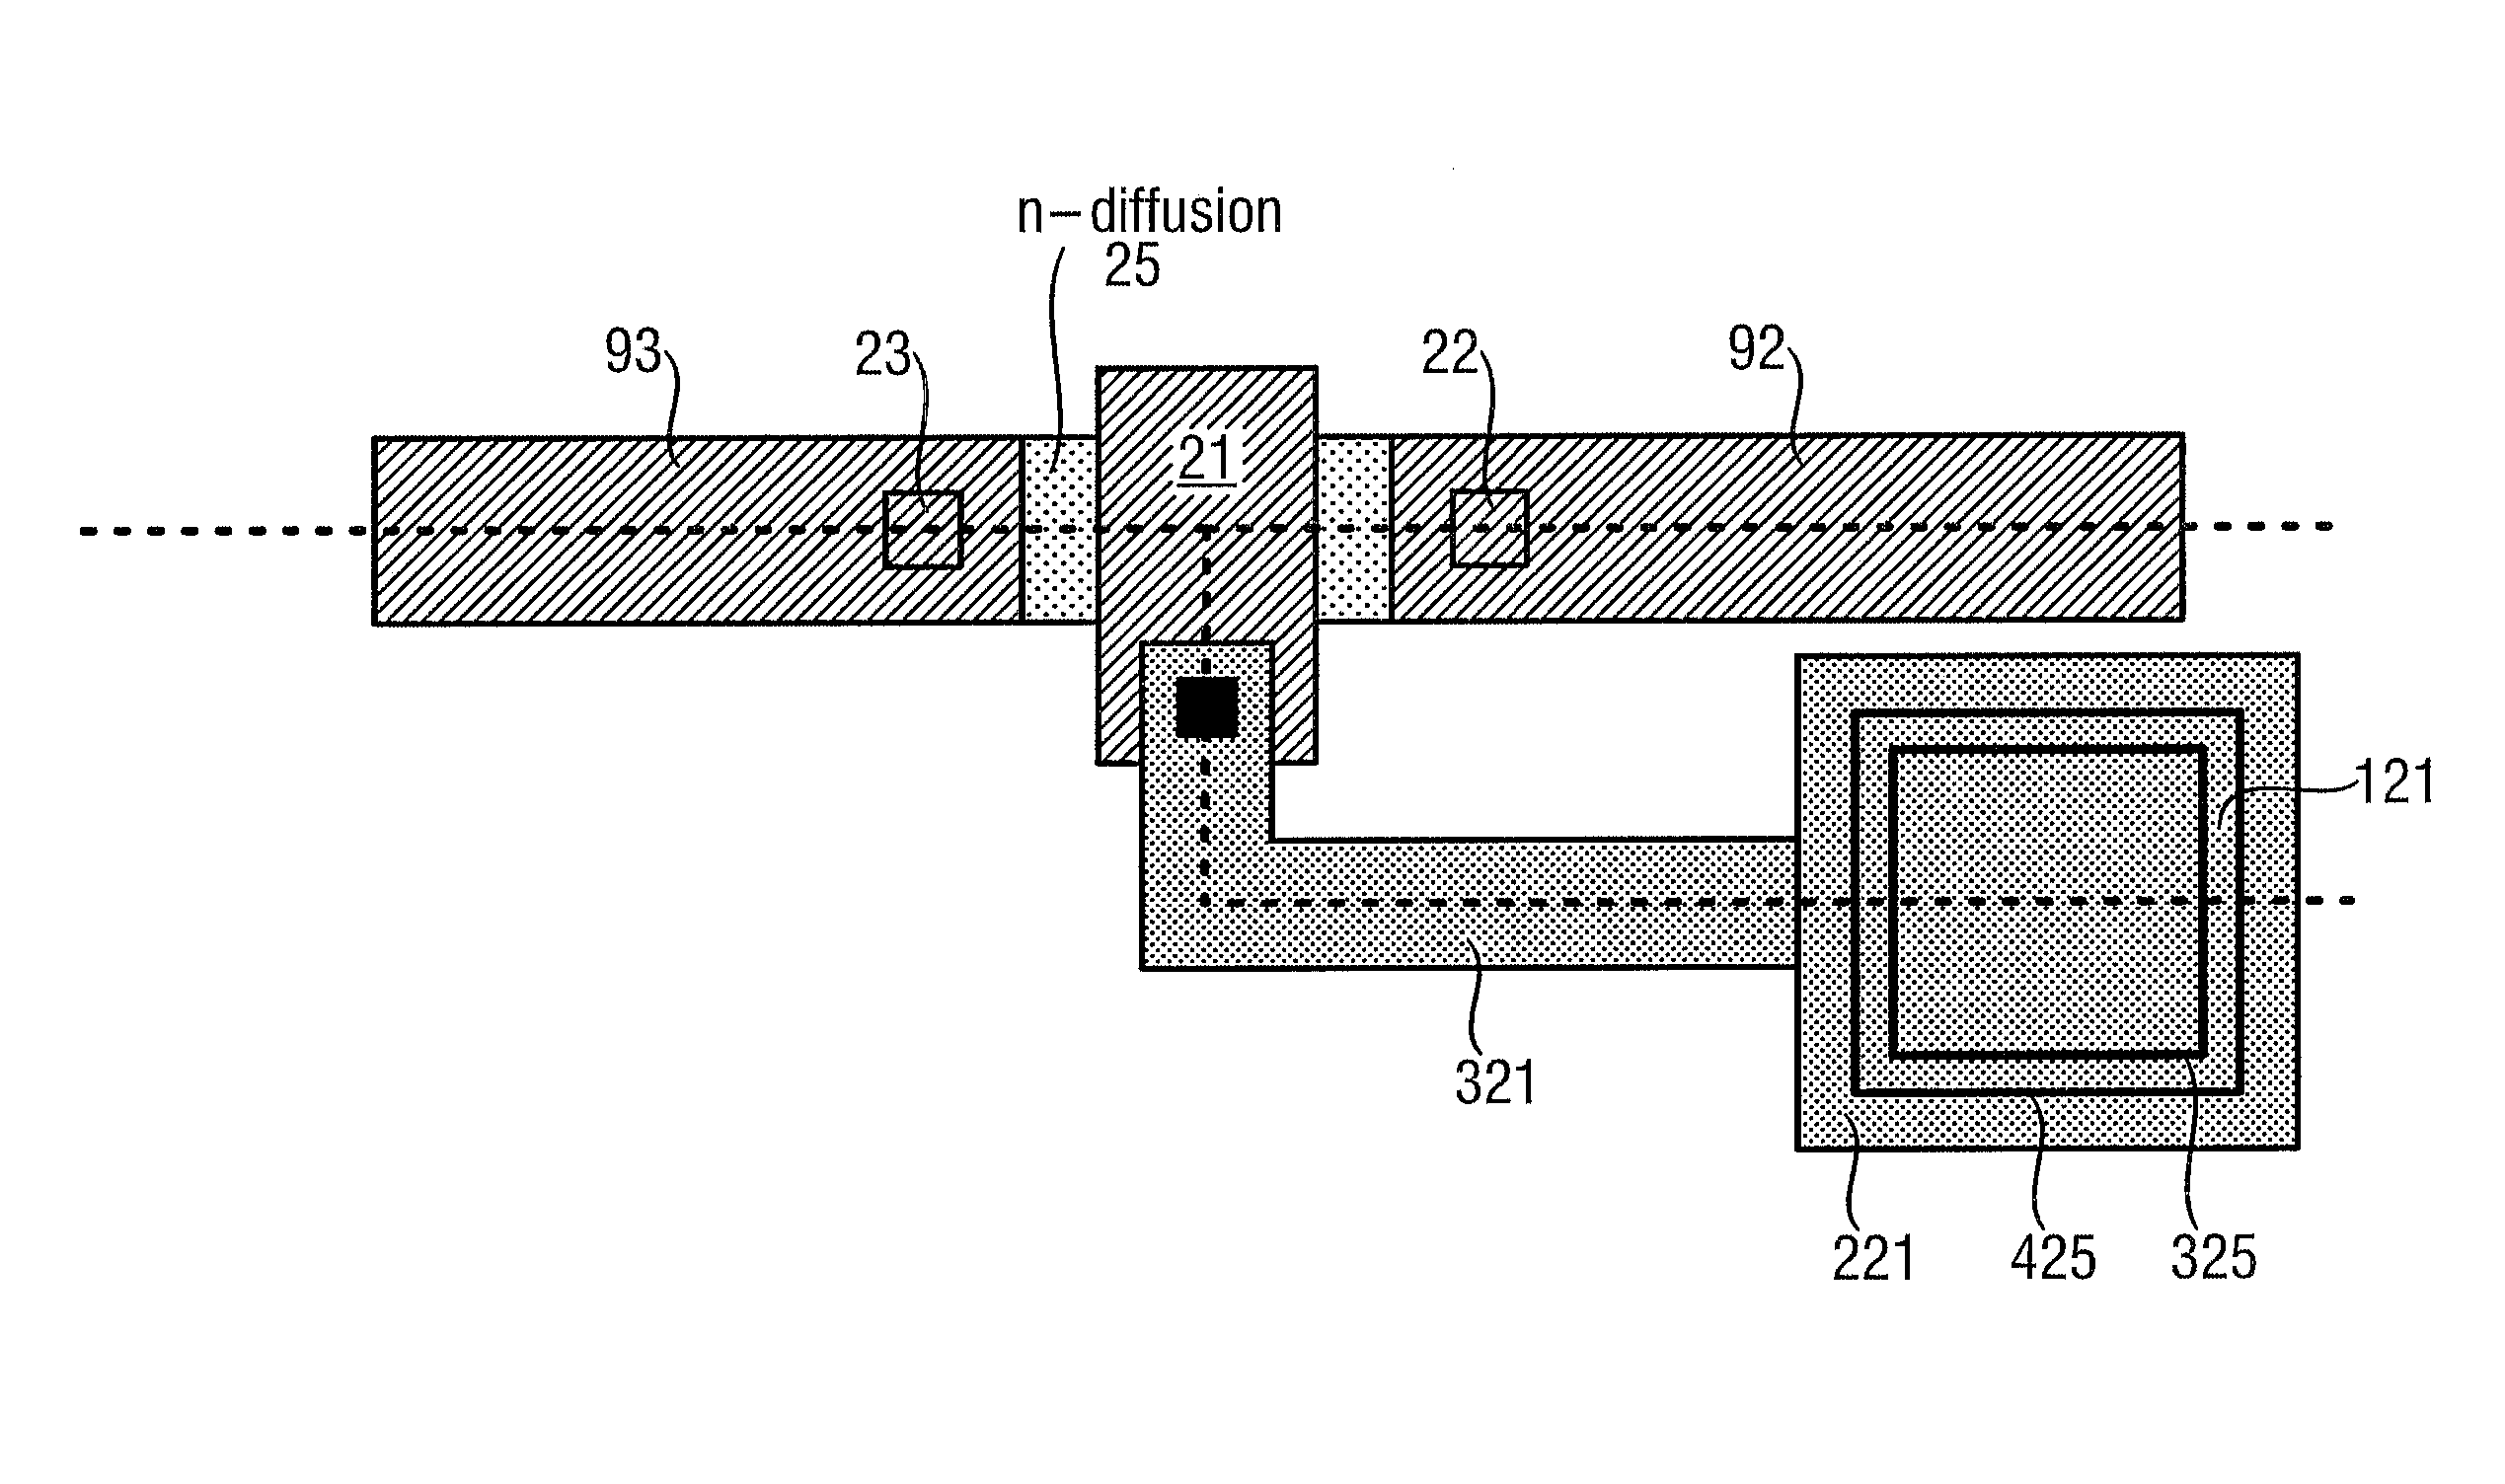 Device to Detect and Measure Static Electric Charge